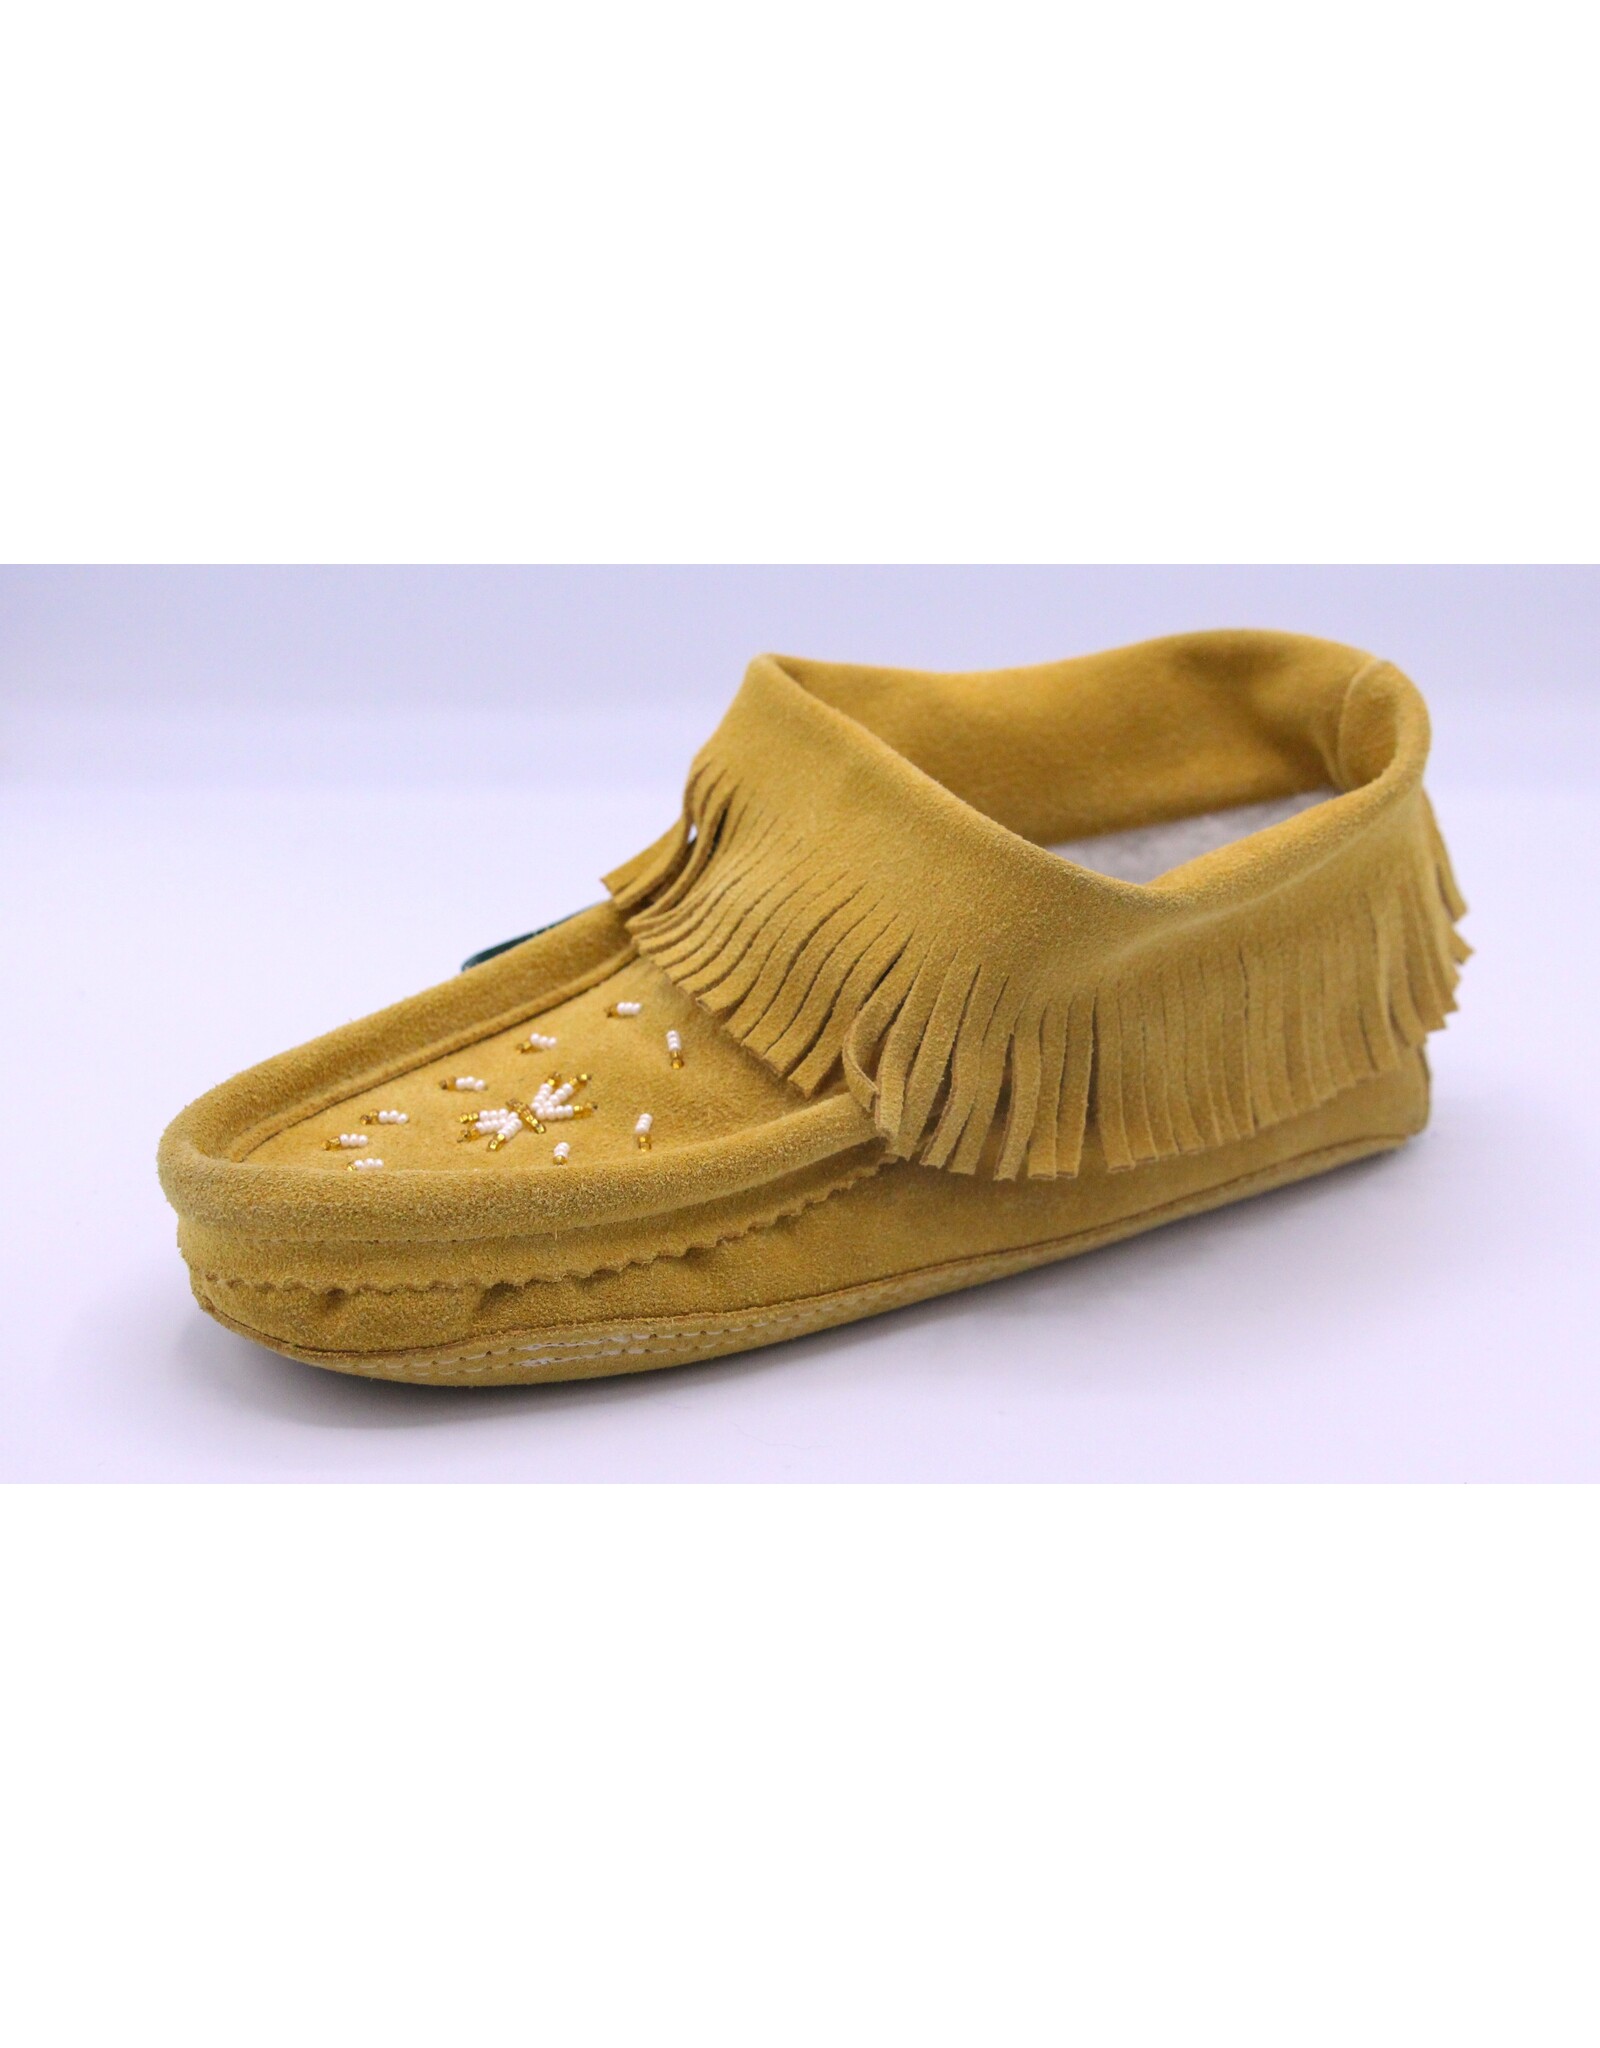 Fringed Beaded Indian Tan Moccasin - 64817L